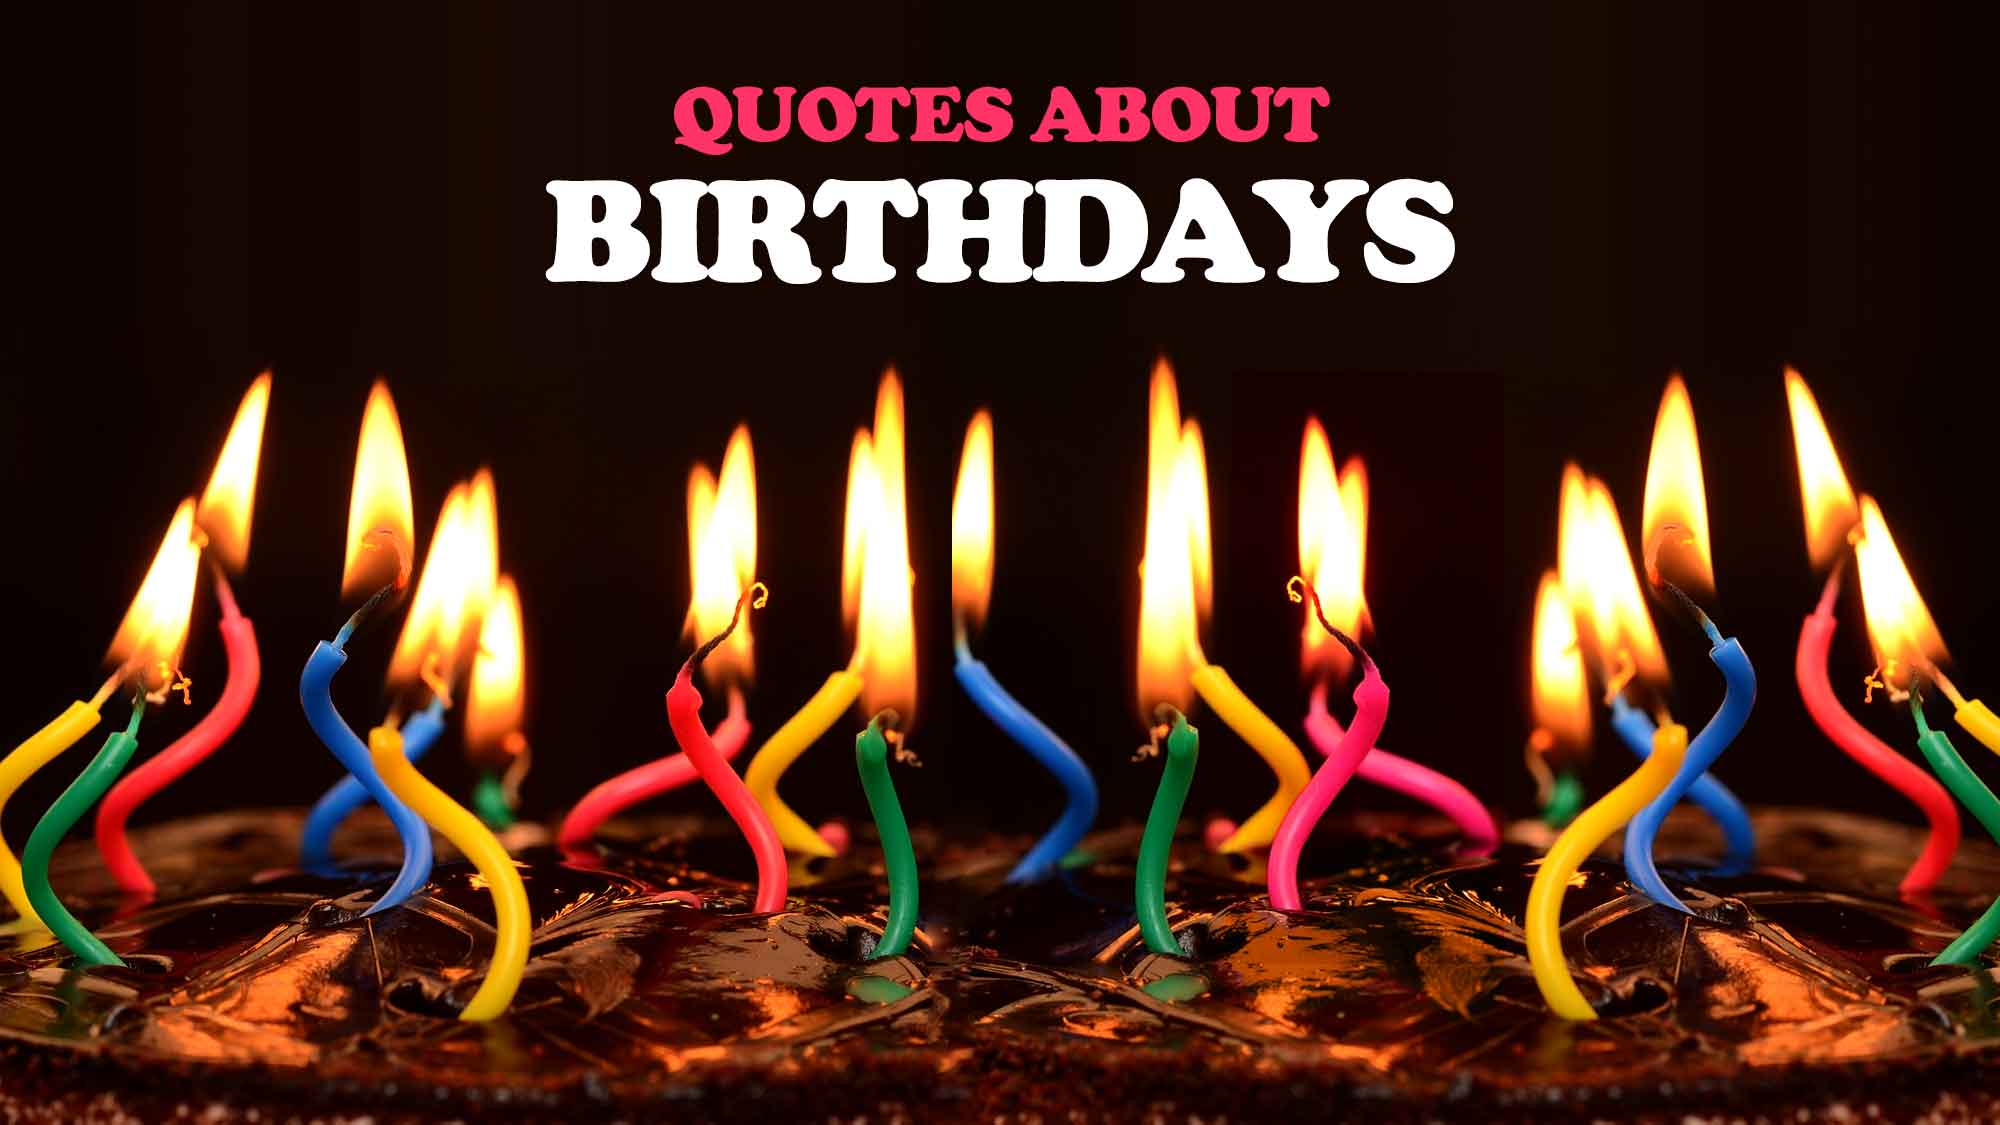 50 Funny Birthday Quotes for You and Friends  PixelsQuoteNet